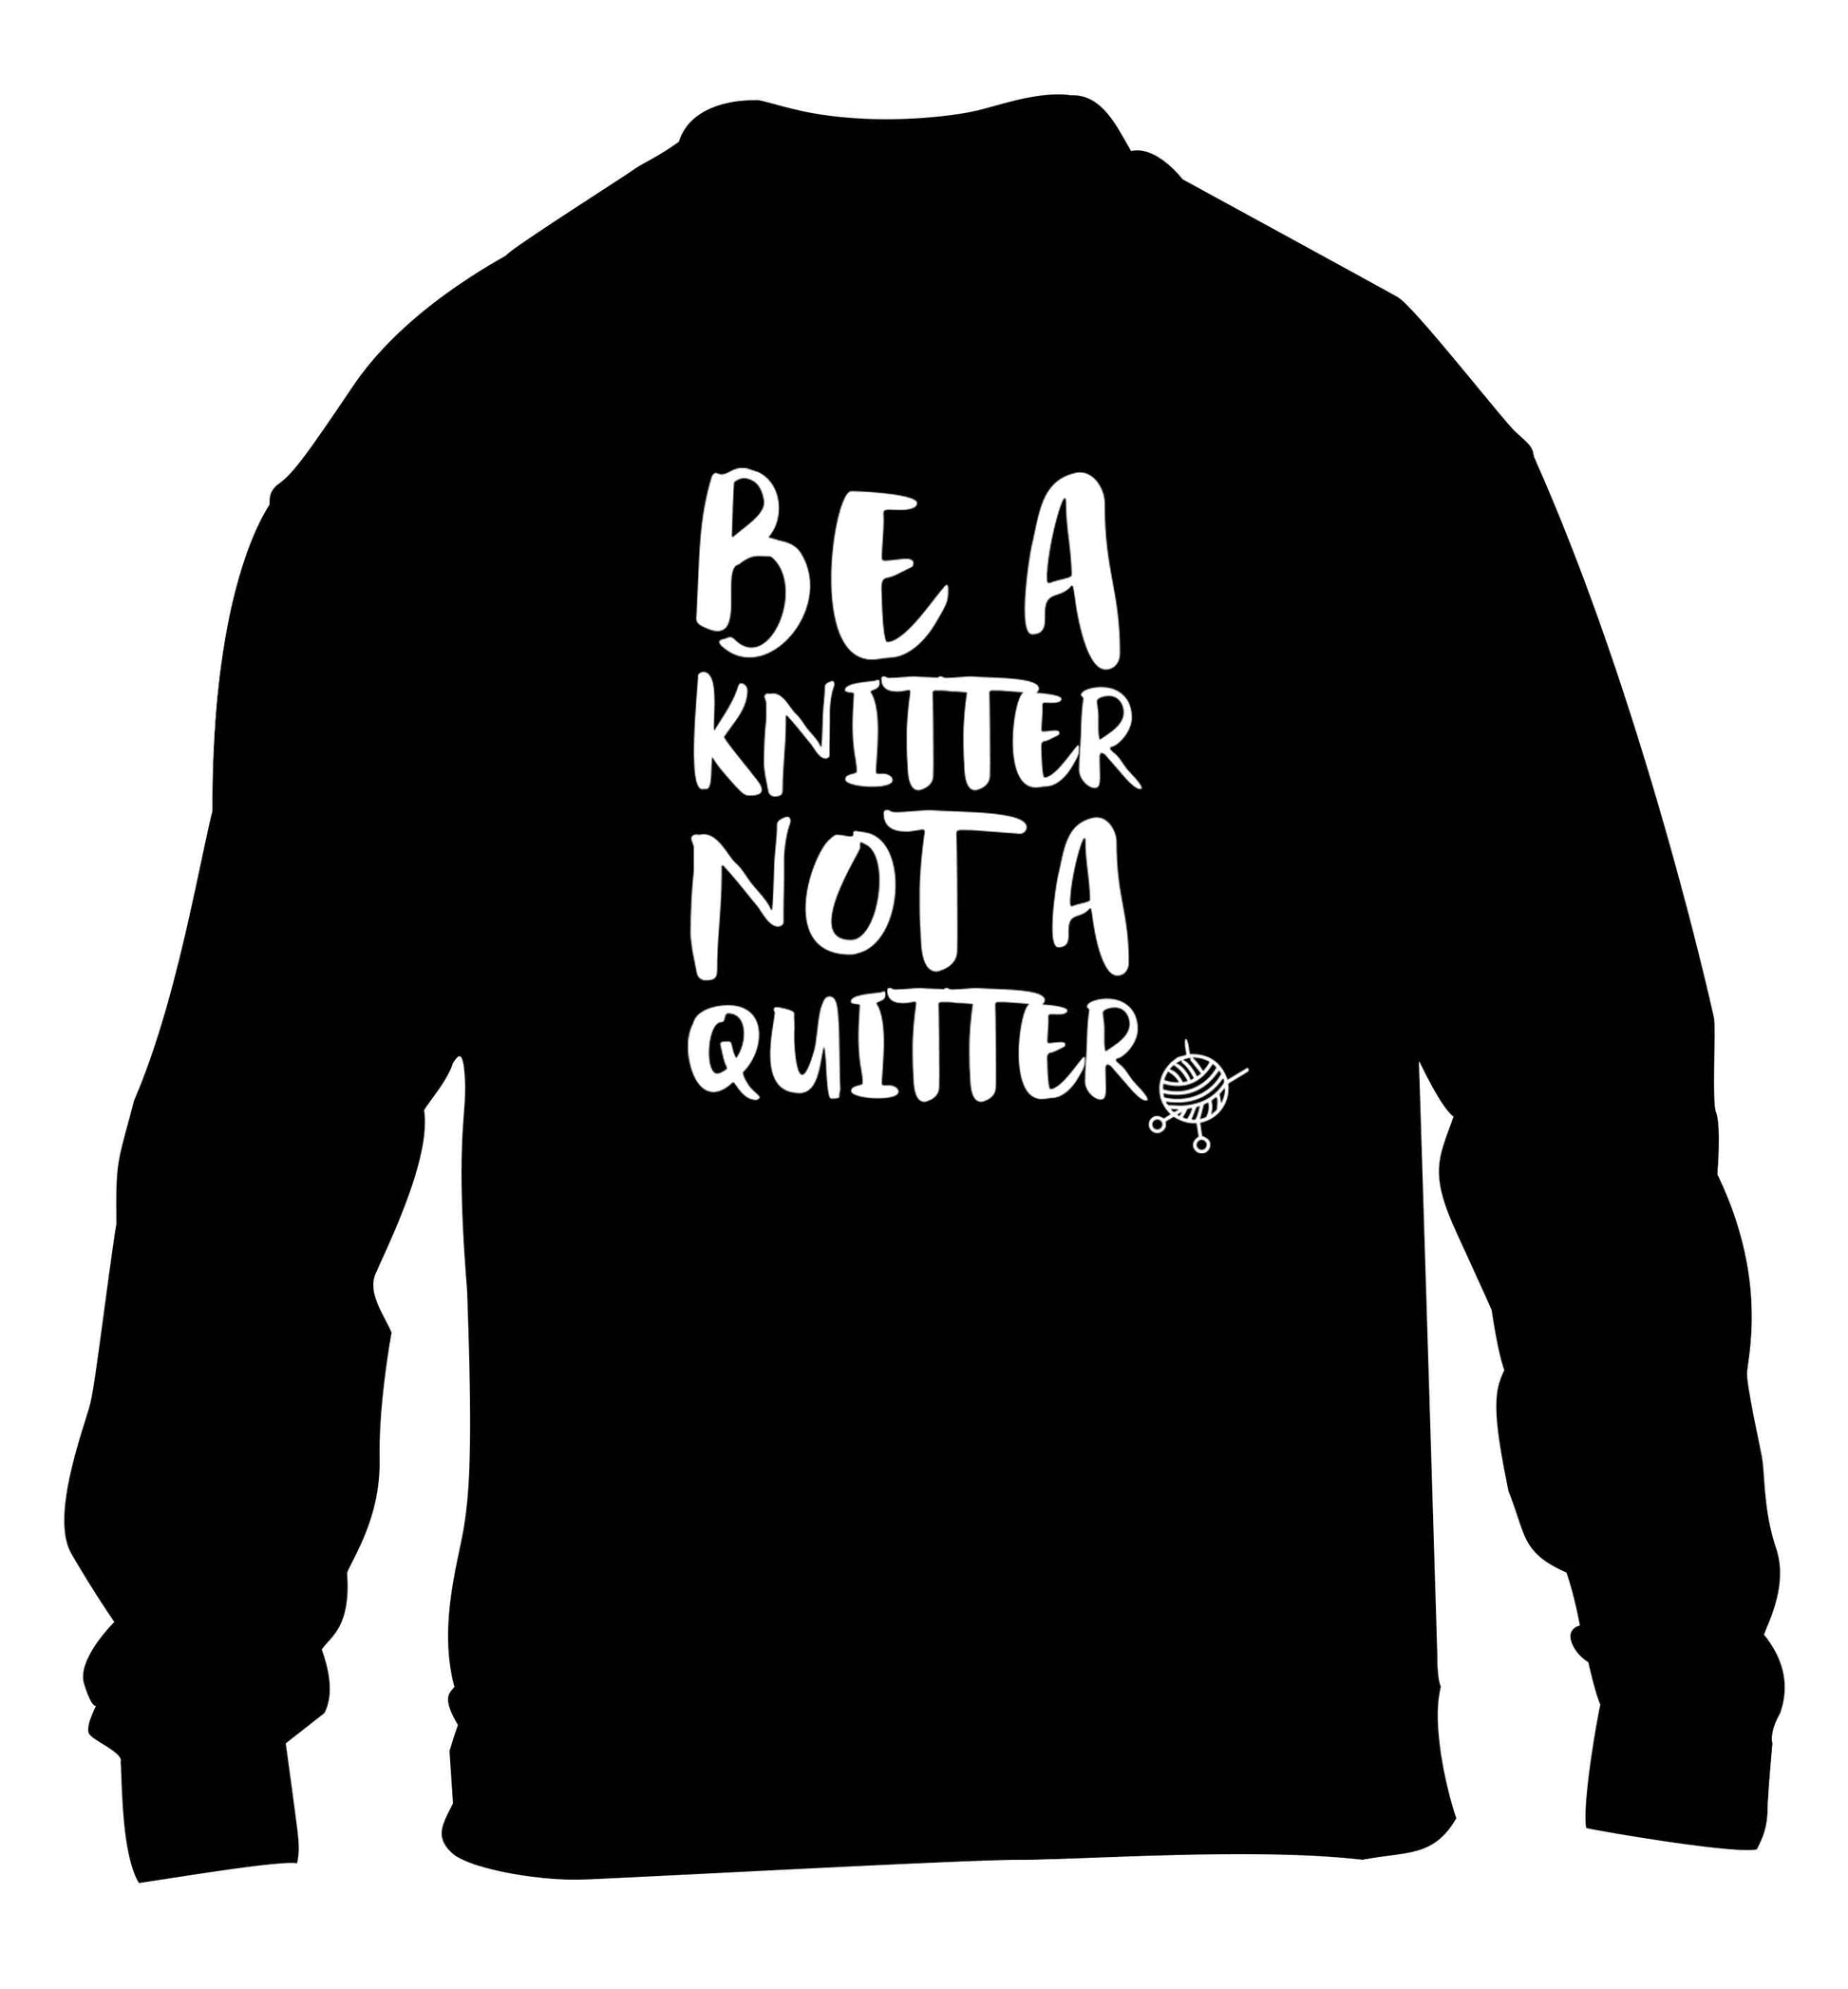 Be a knitter not a quitter children's black sweater 12-13 Years